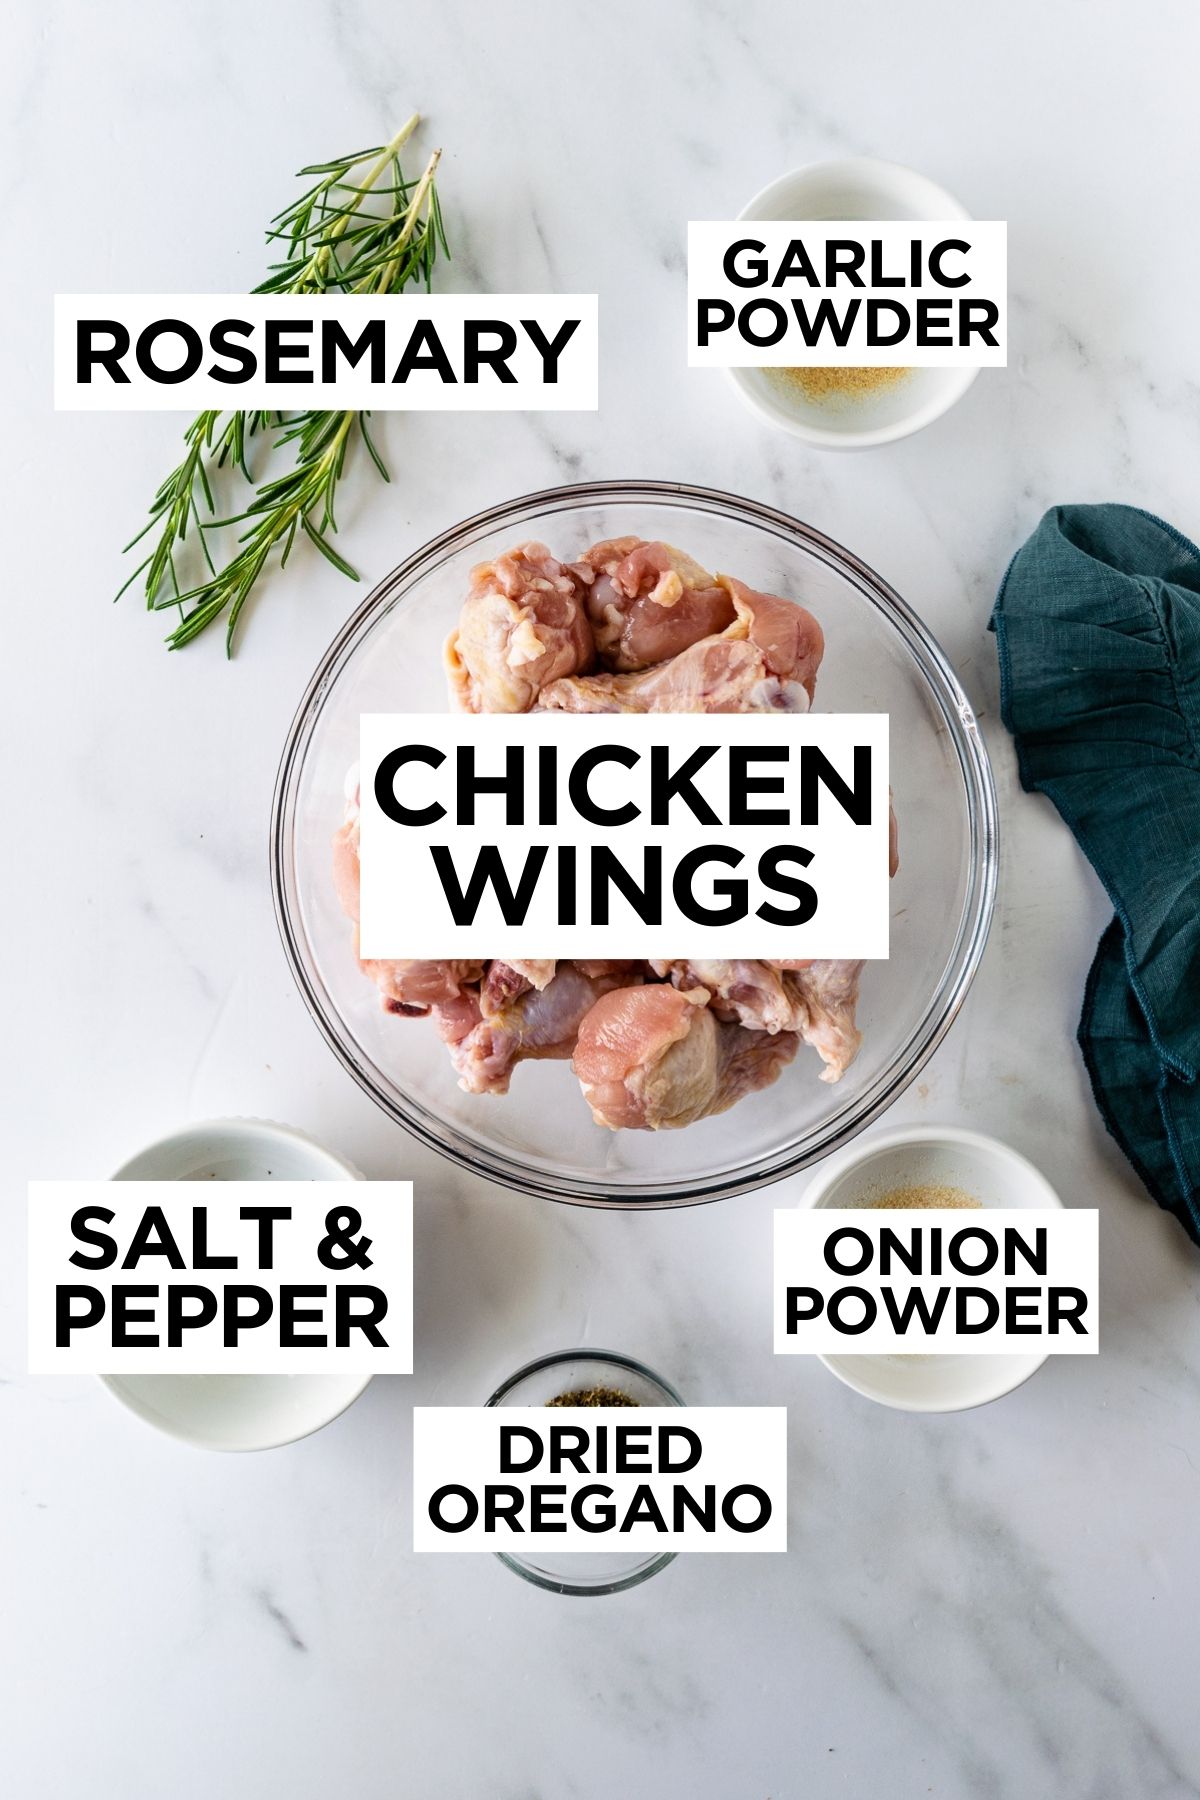 ingredients for grilled chicken wings such as wings, fresh rosemary and spices.